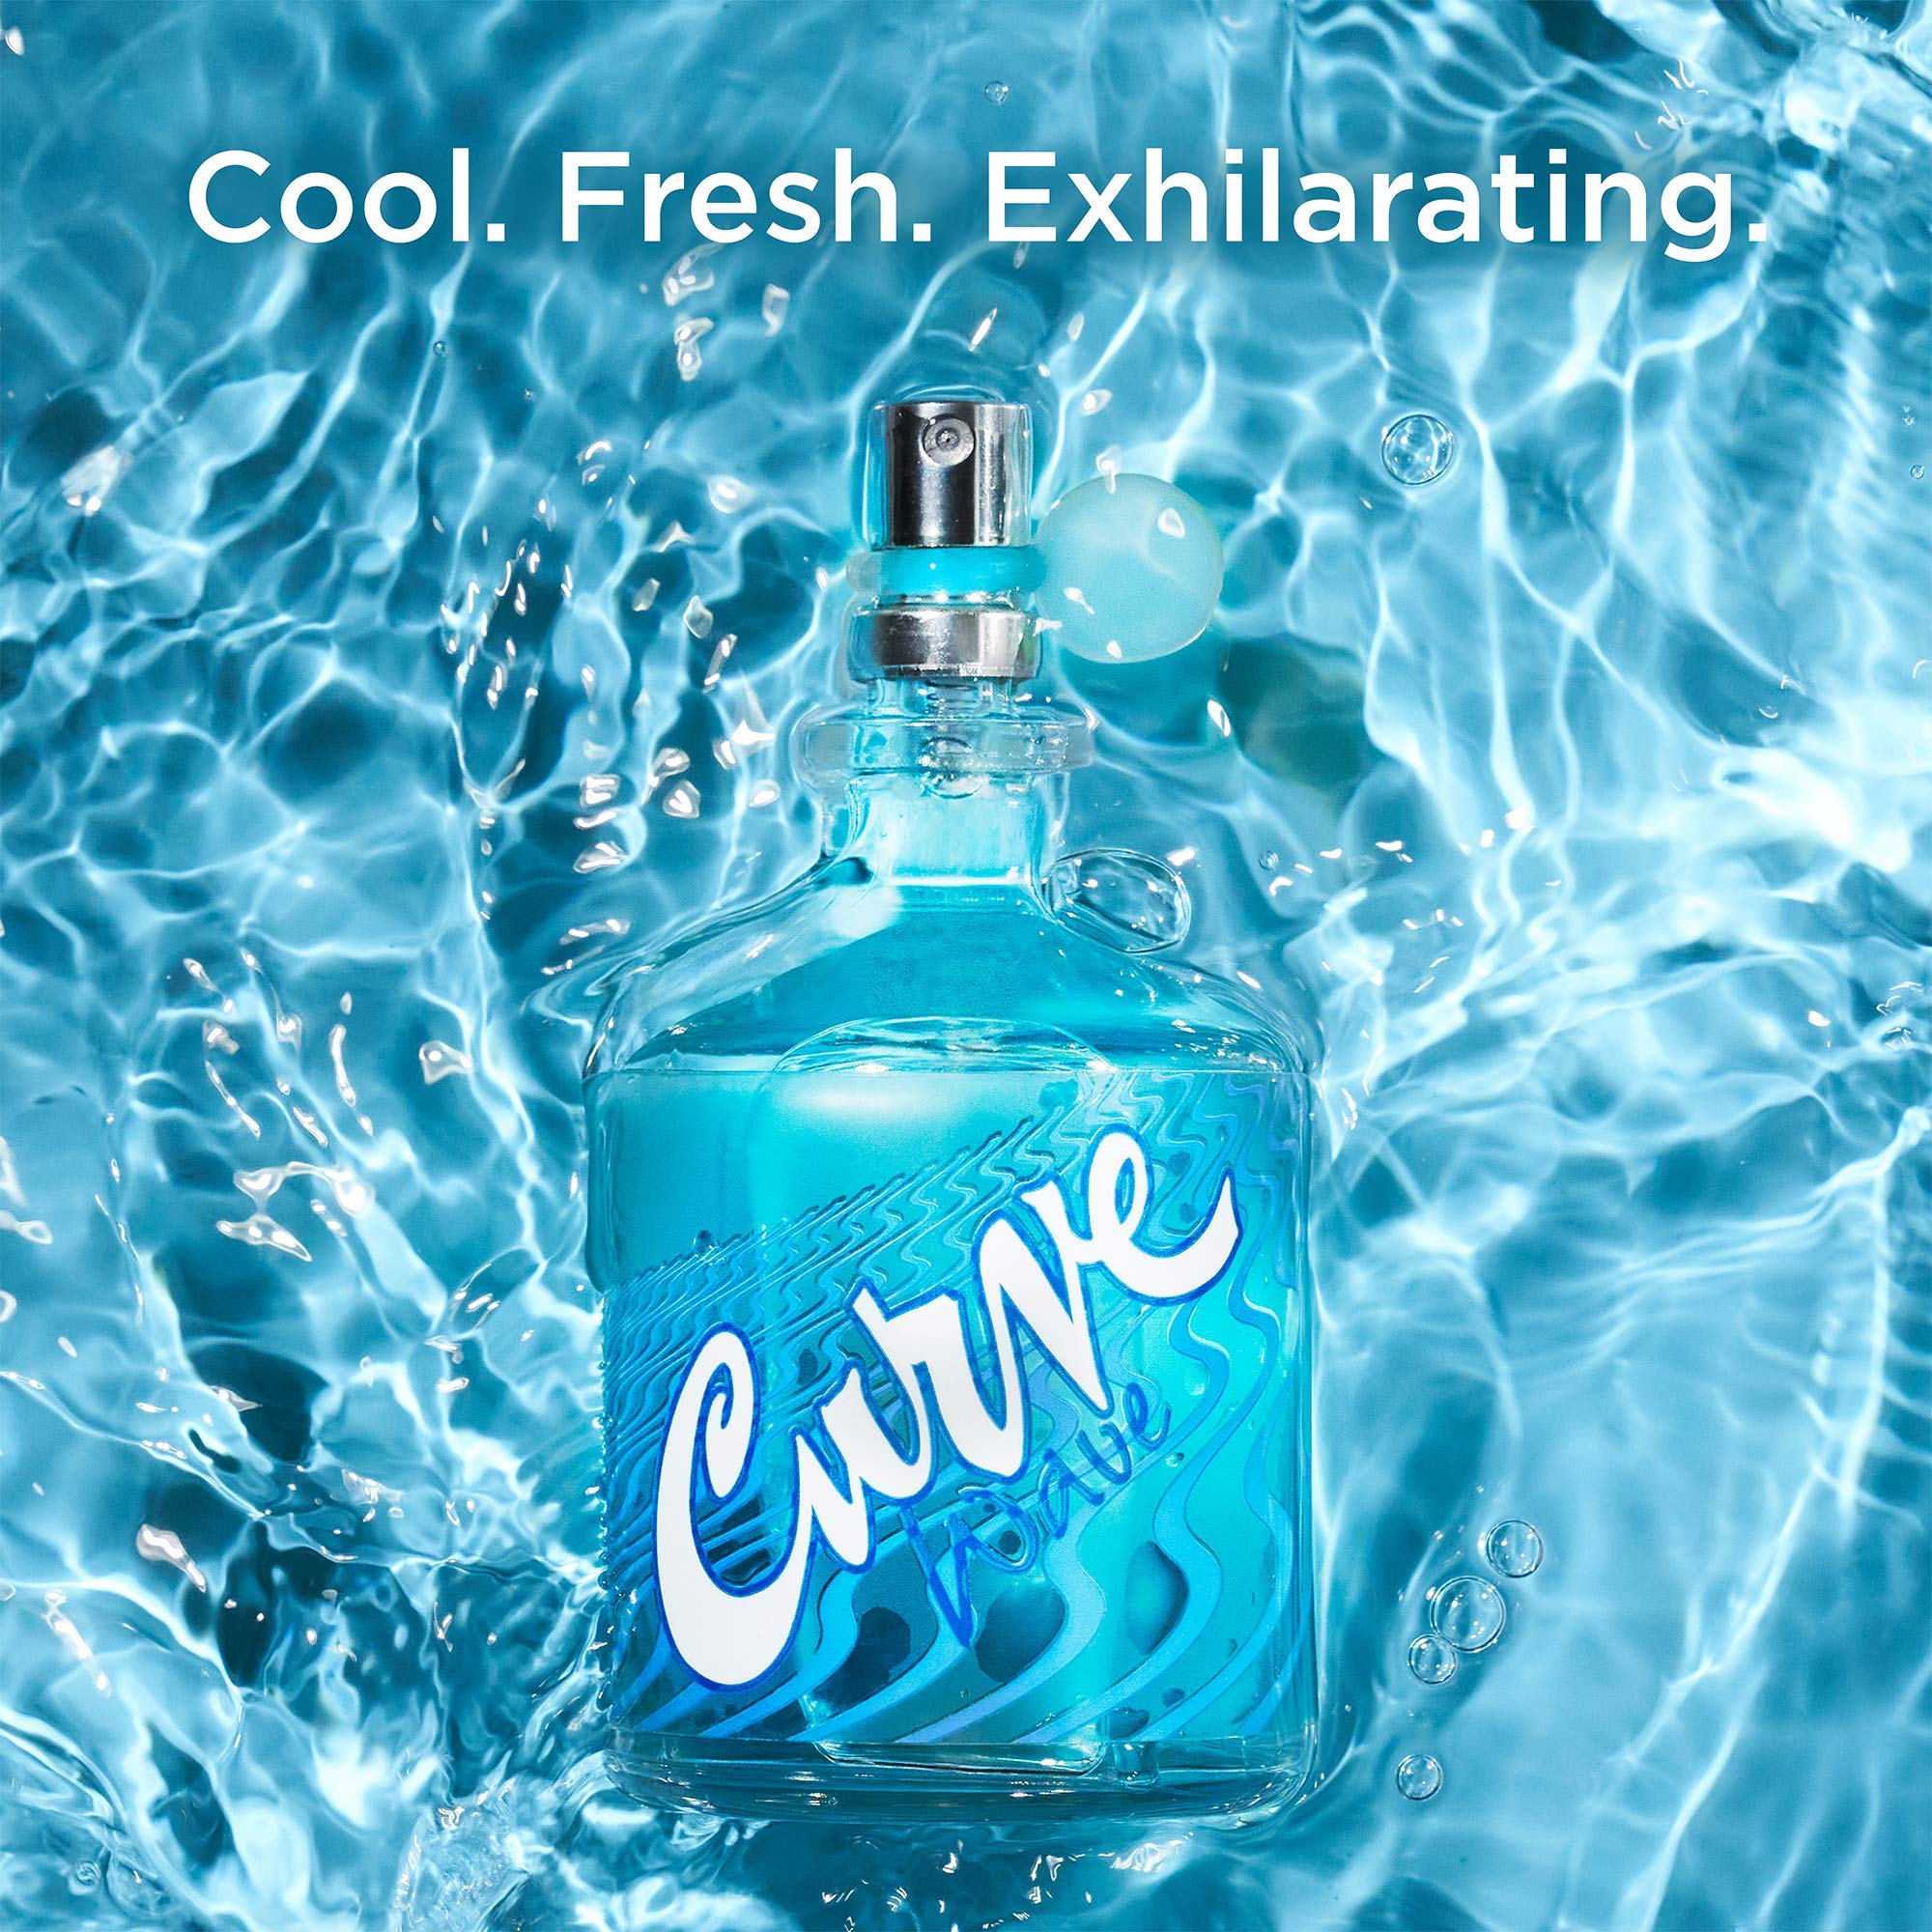 Curve Men's Cologne Fragrance Spray, Casual Cool Day or Night Scent, Curve Wave, 4.2 Fl Oz